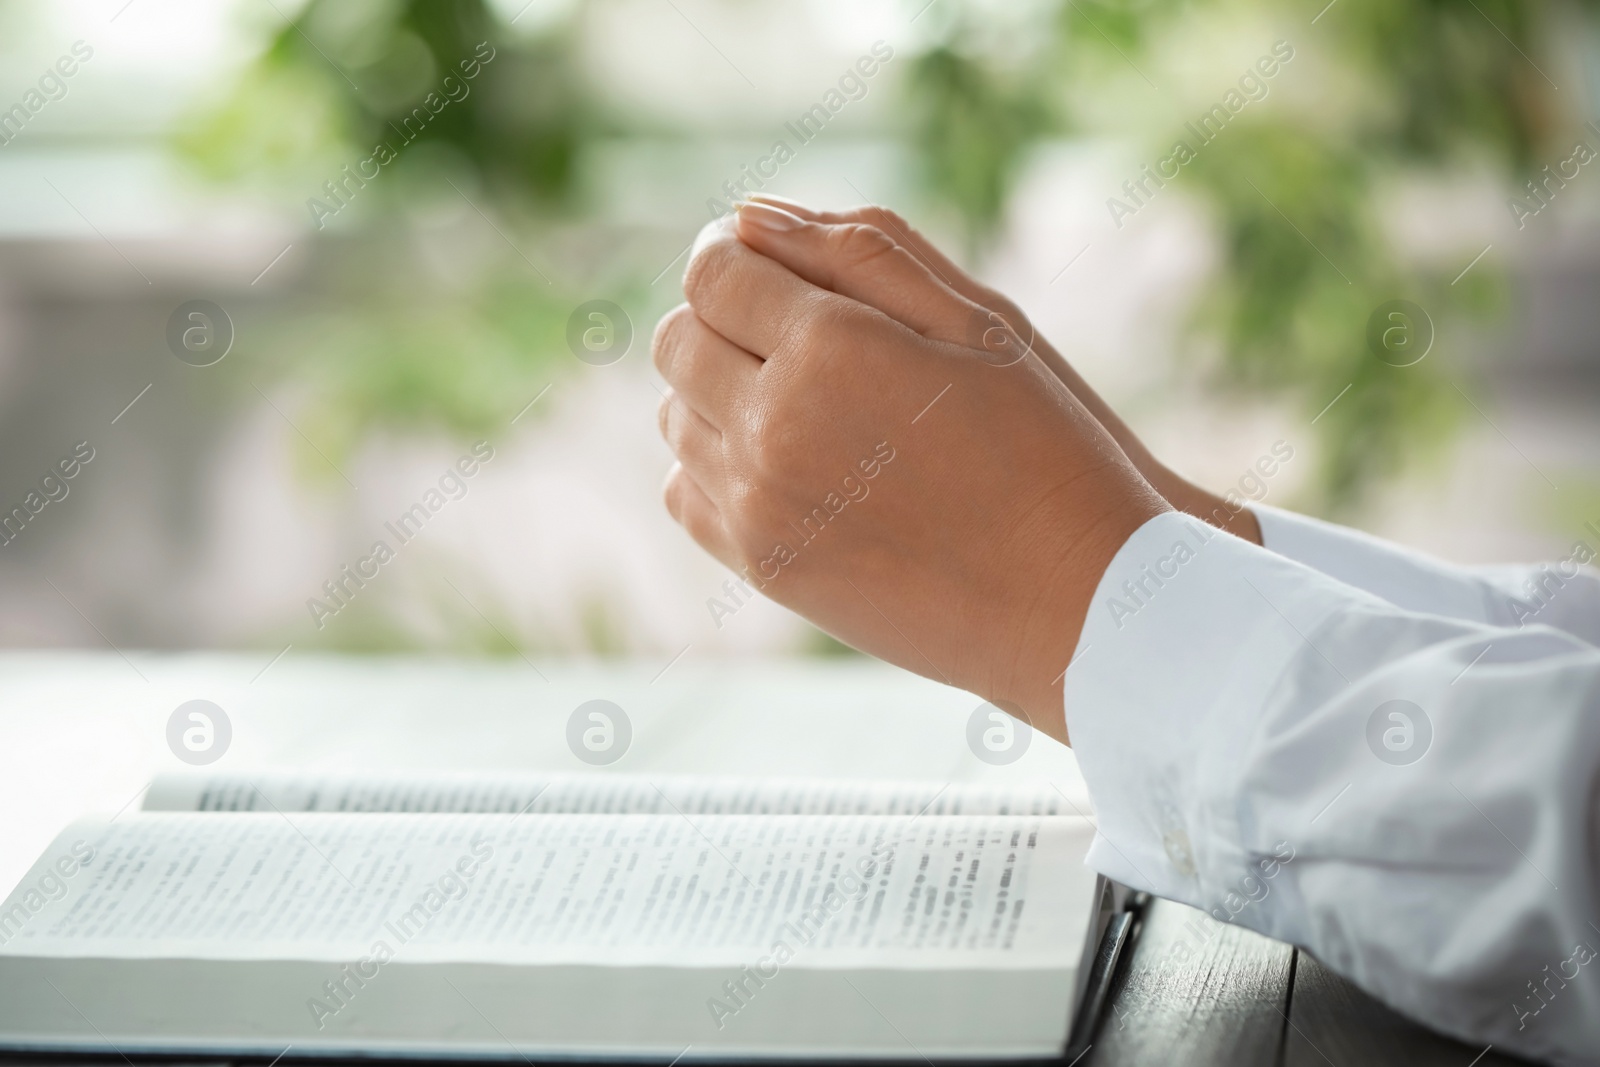 Photo of Woman holding hands clasped while praying at grey table with Bible, closeup